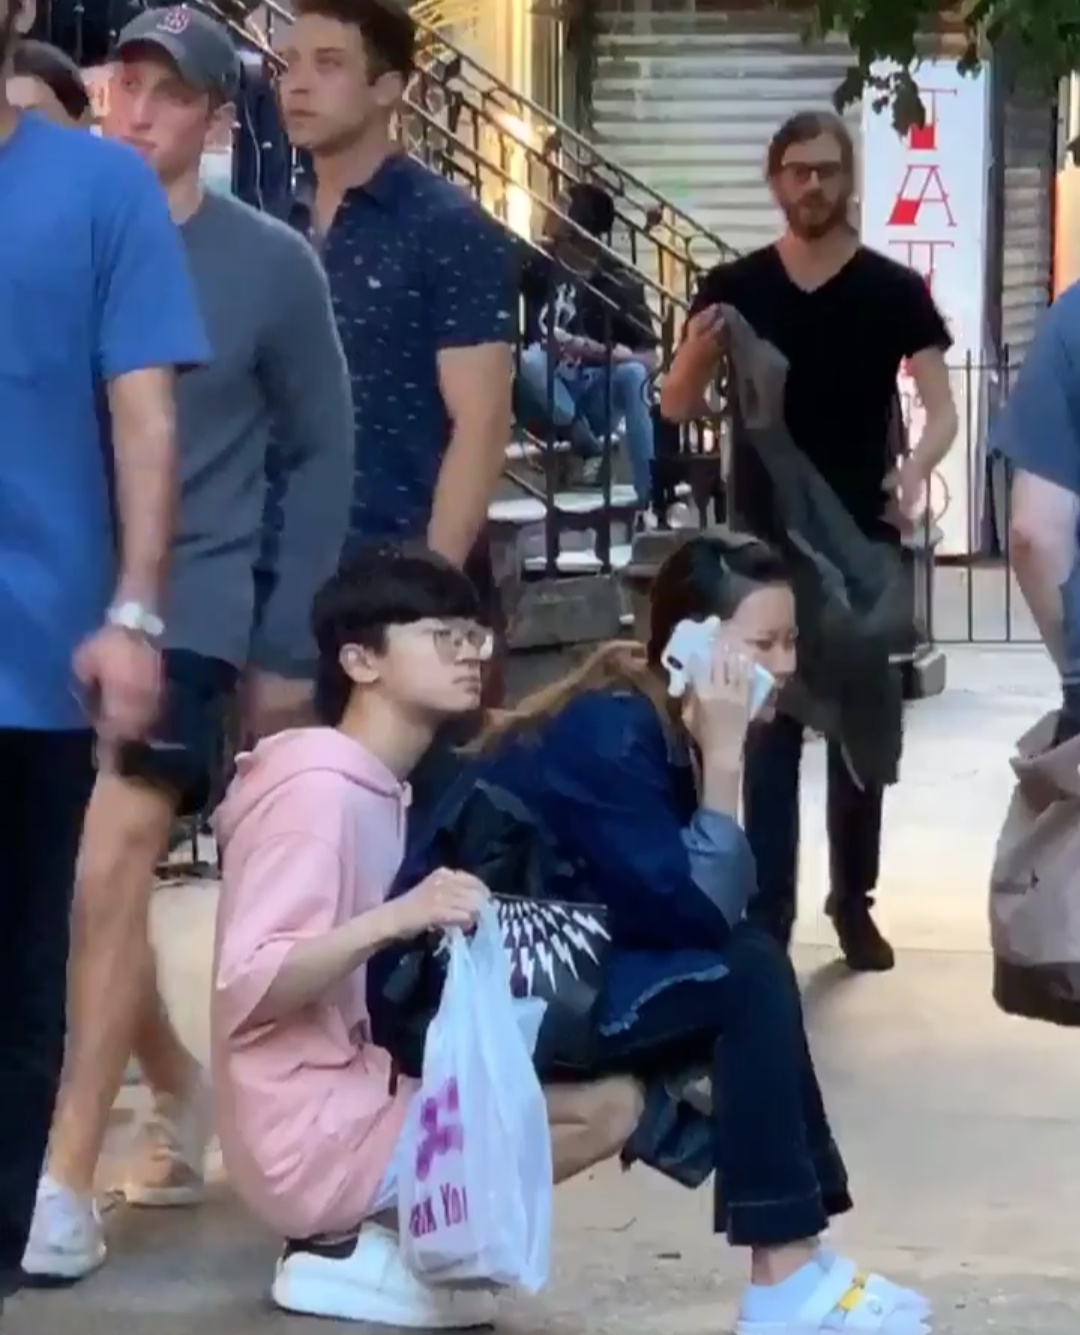 Loving Man Became A Human-Chair For Tired Girlfriend In The Middle Of The Sidewalk